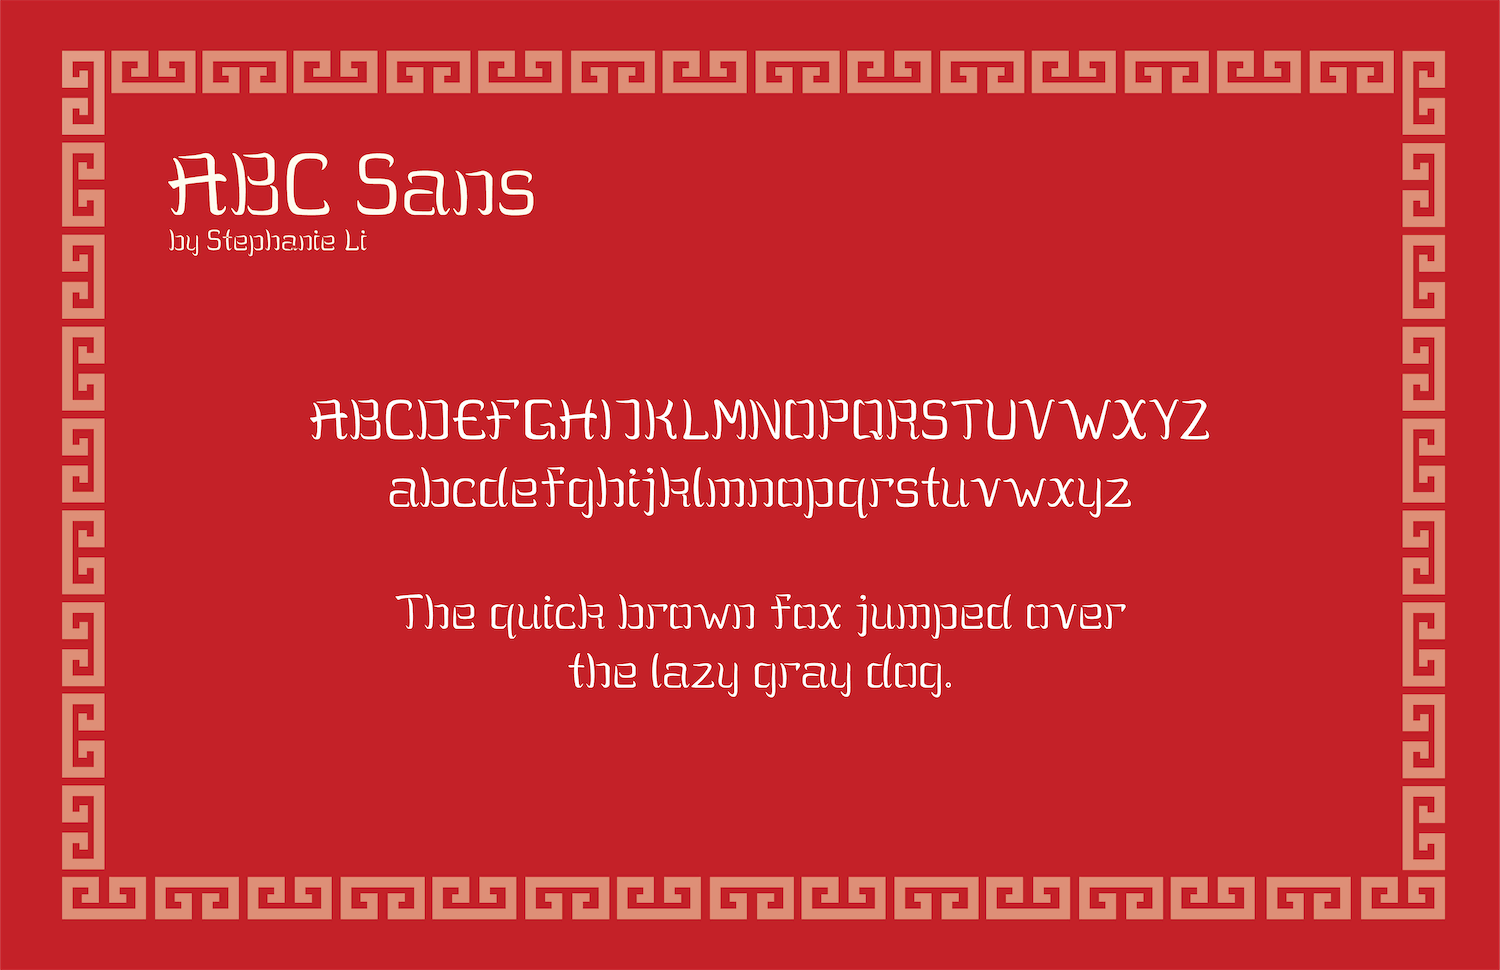 A red image of a font demonstrated in both capital and lowercase letters. It is surrounded by a Chinese-style border.